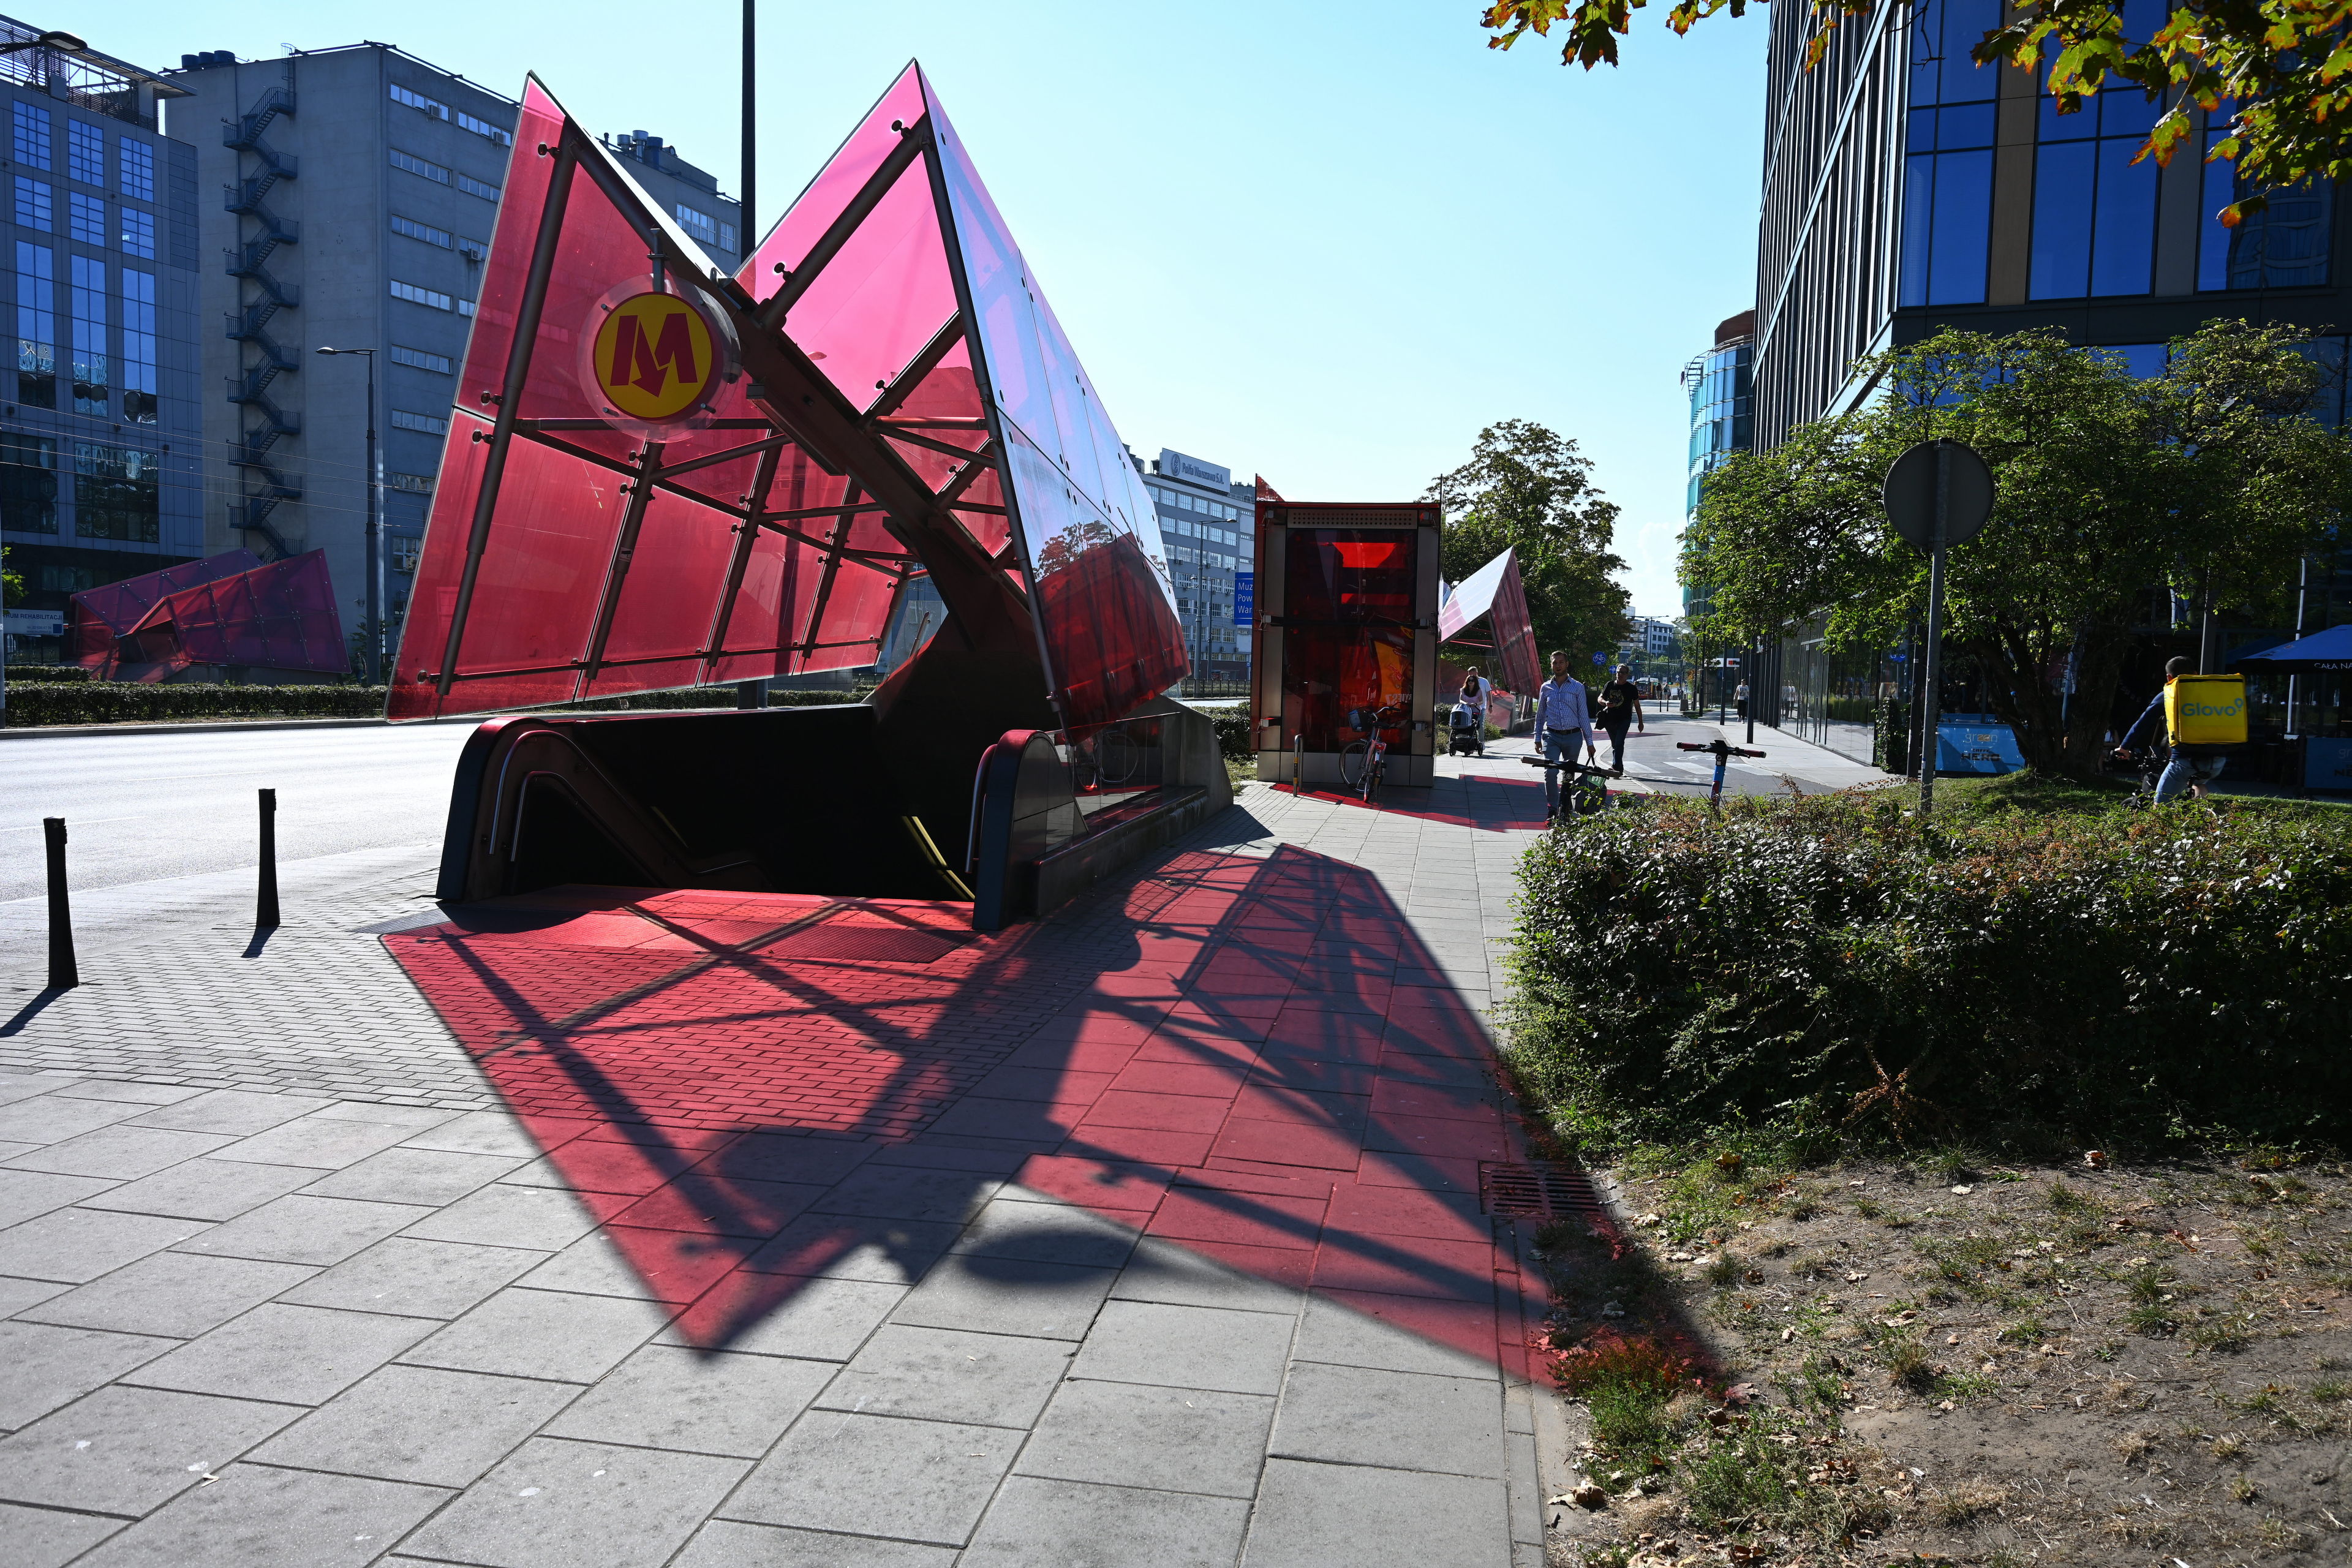 The entrance to a Warsaw Metro station